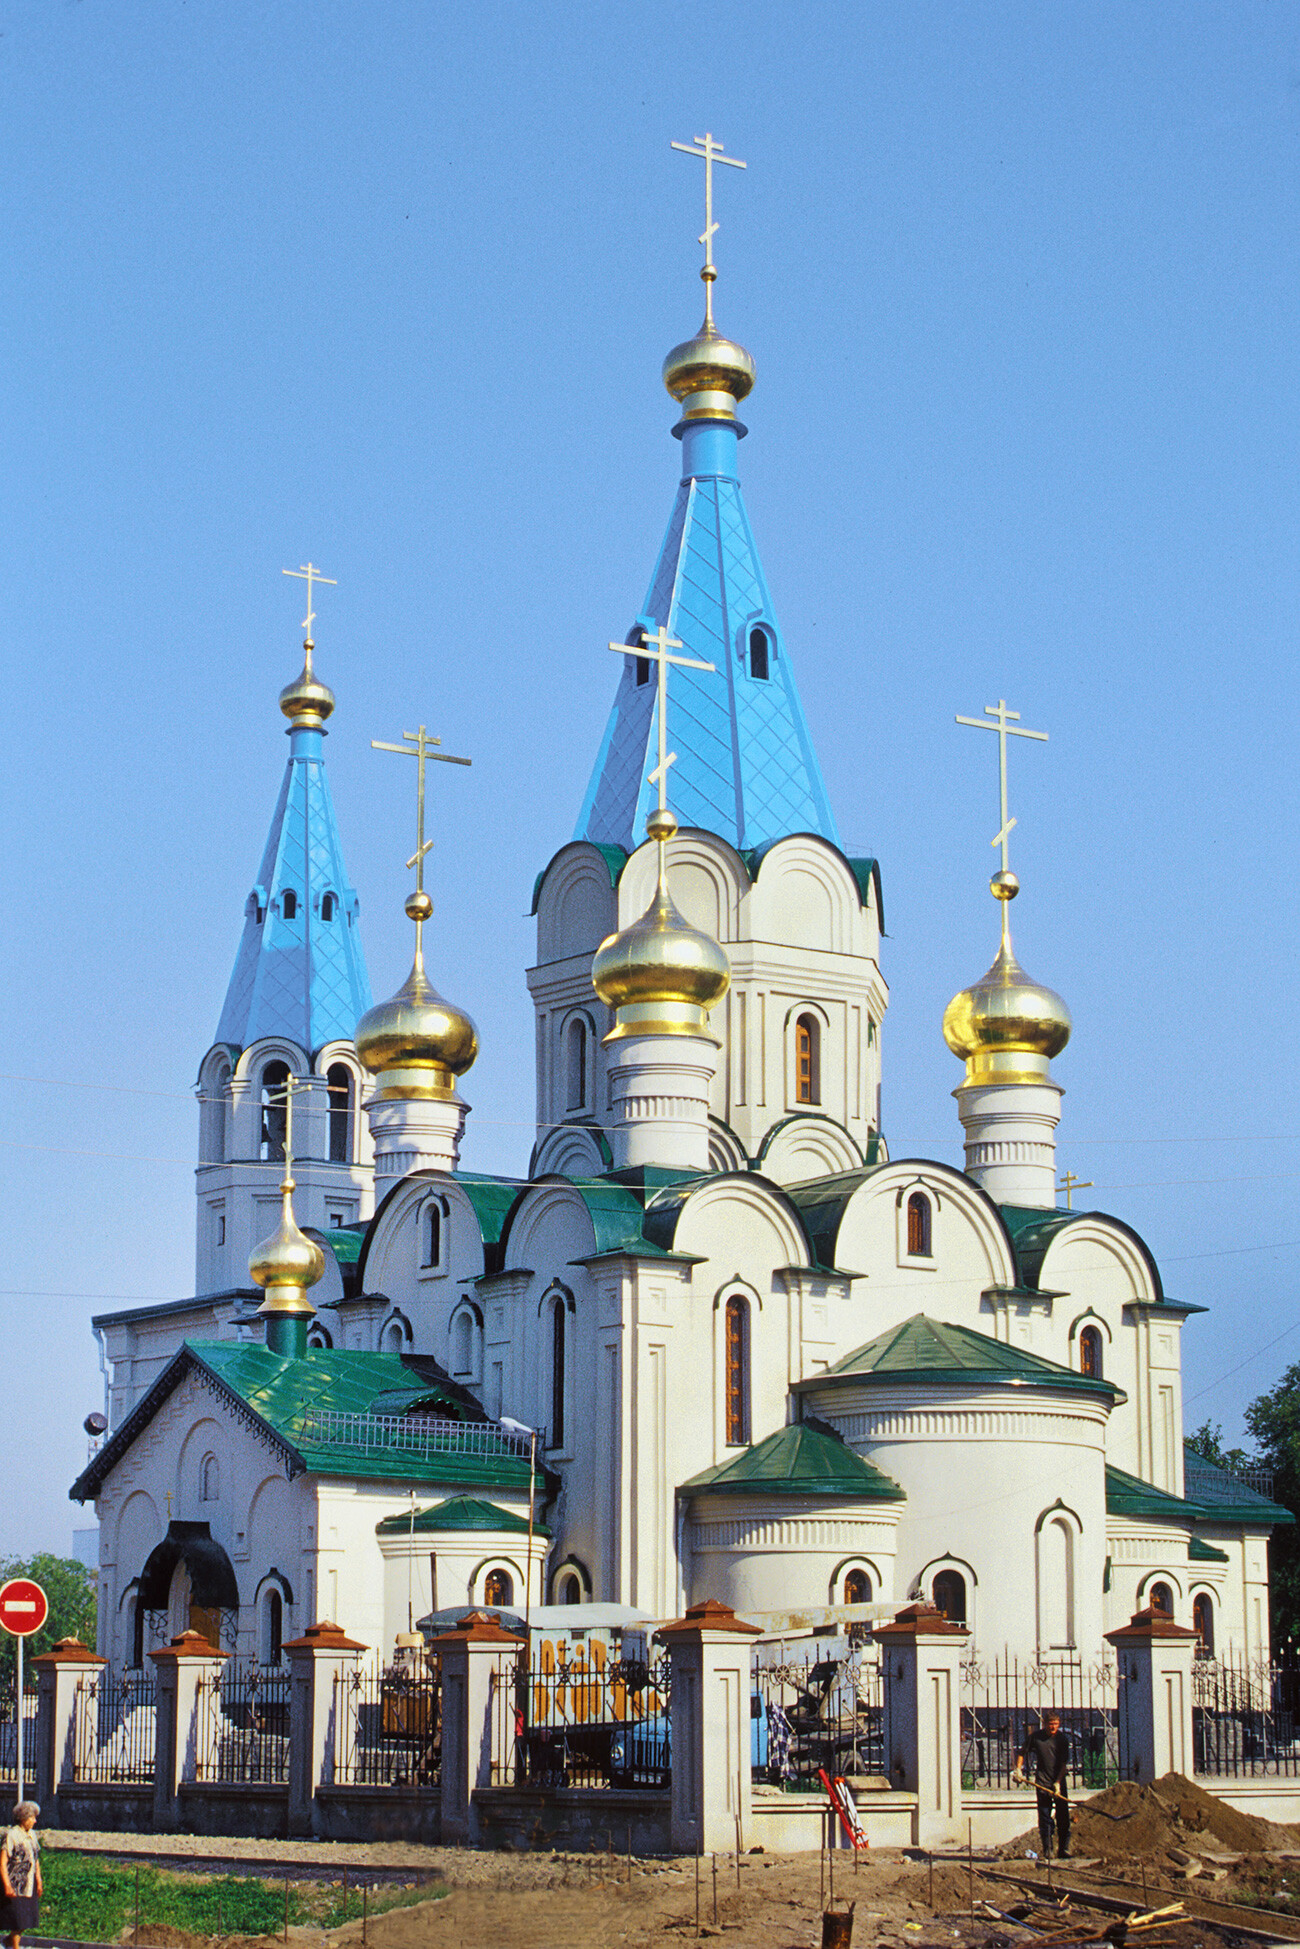 Cathedral of the Annunciation, southeast view. Construction begun in 1997, completed in 2003. Blagoveshchensk takes its name from the Russian word for Annunciation. June 15, 2002